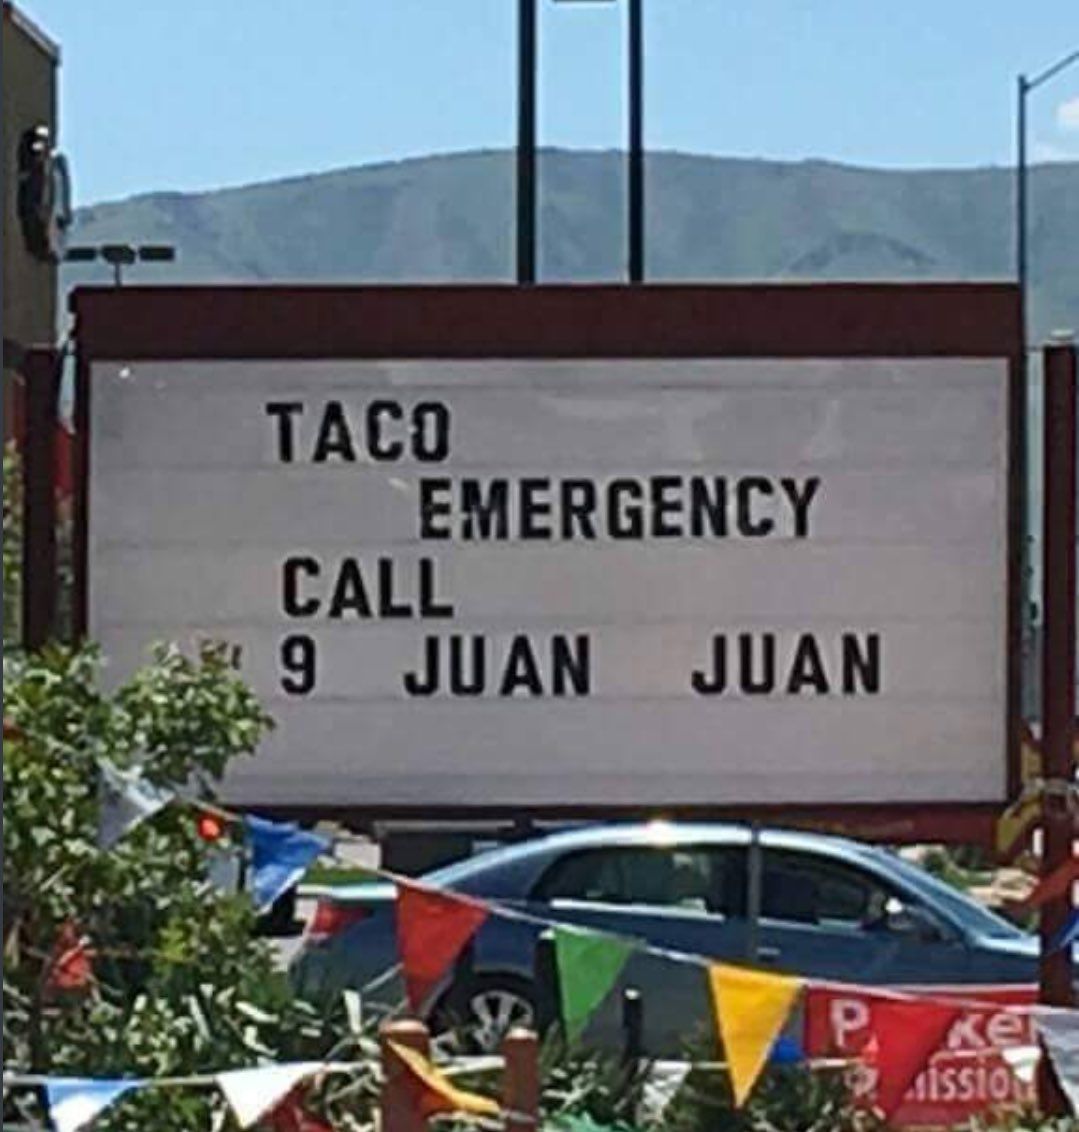 Who to call in an emergency!